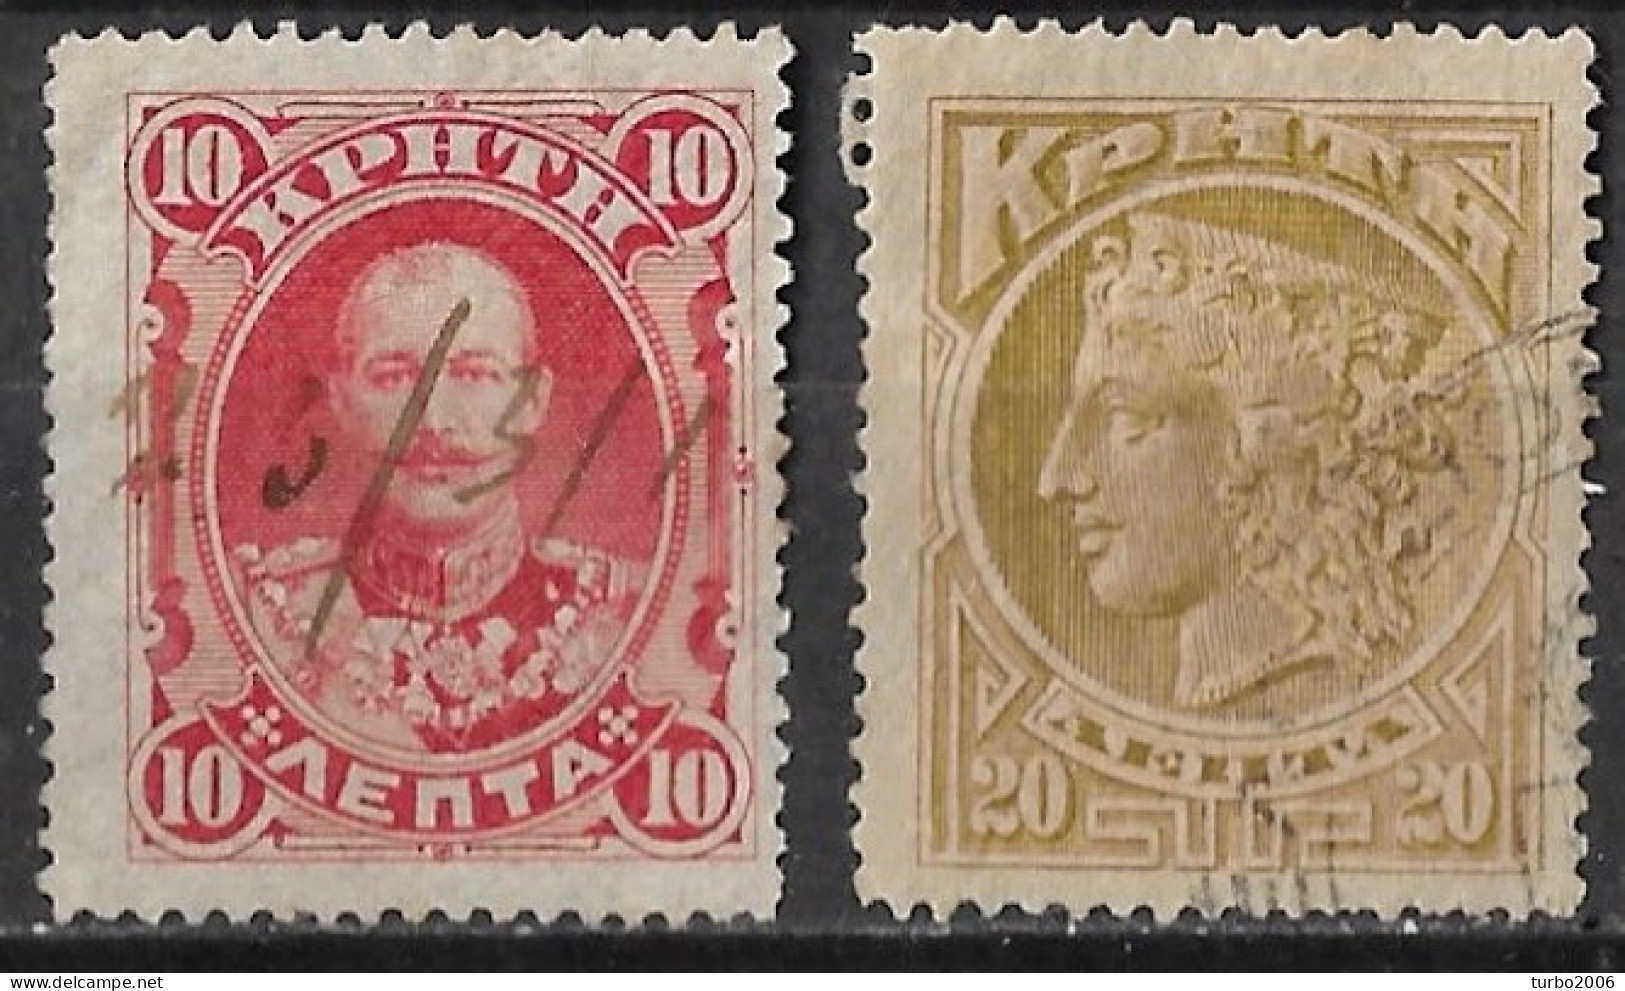 CRETE Fiscally Used 1900 1st Issue Of The Cretan State 10 L. Red Vl. 3 + Fiscal 20 L Yellow Olive (Feenstra 36) - Crete